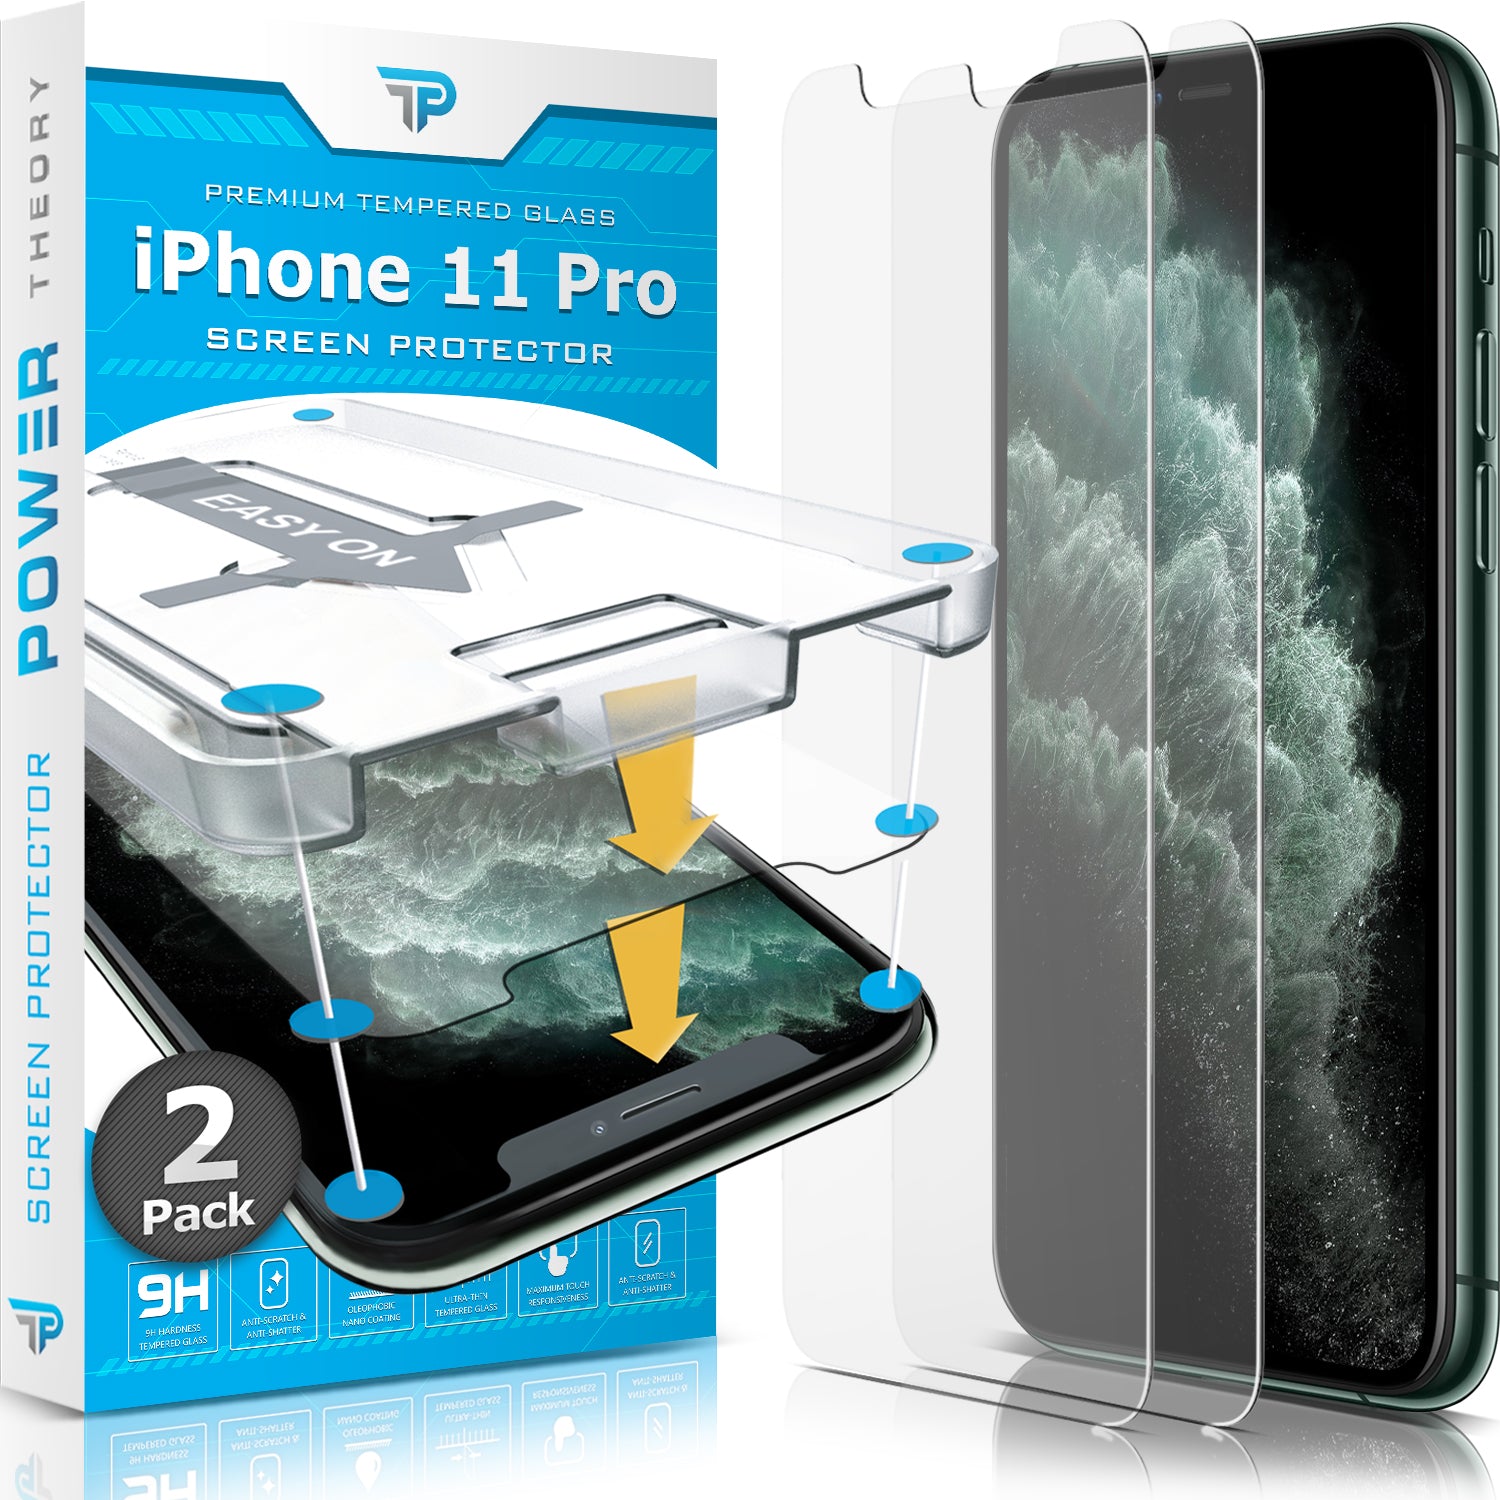 iPhone 11 Pro Tempered Glass Screen Protector [2-Pack]